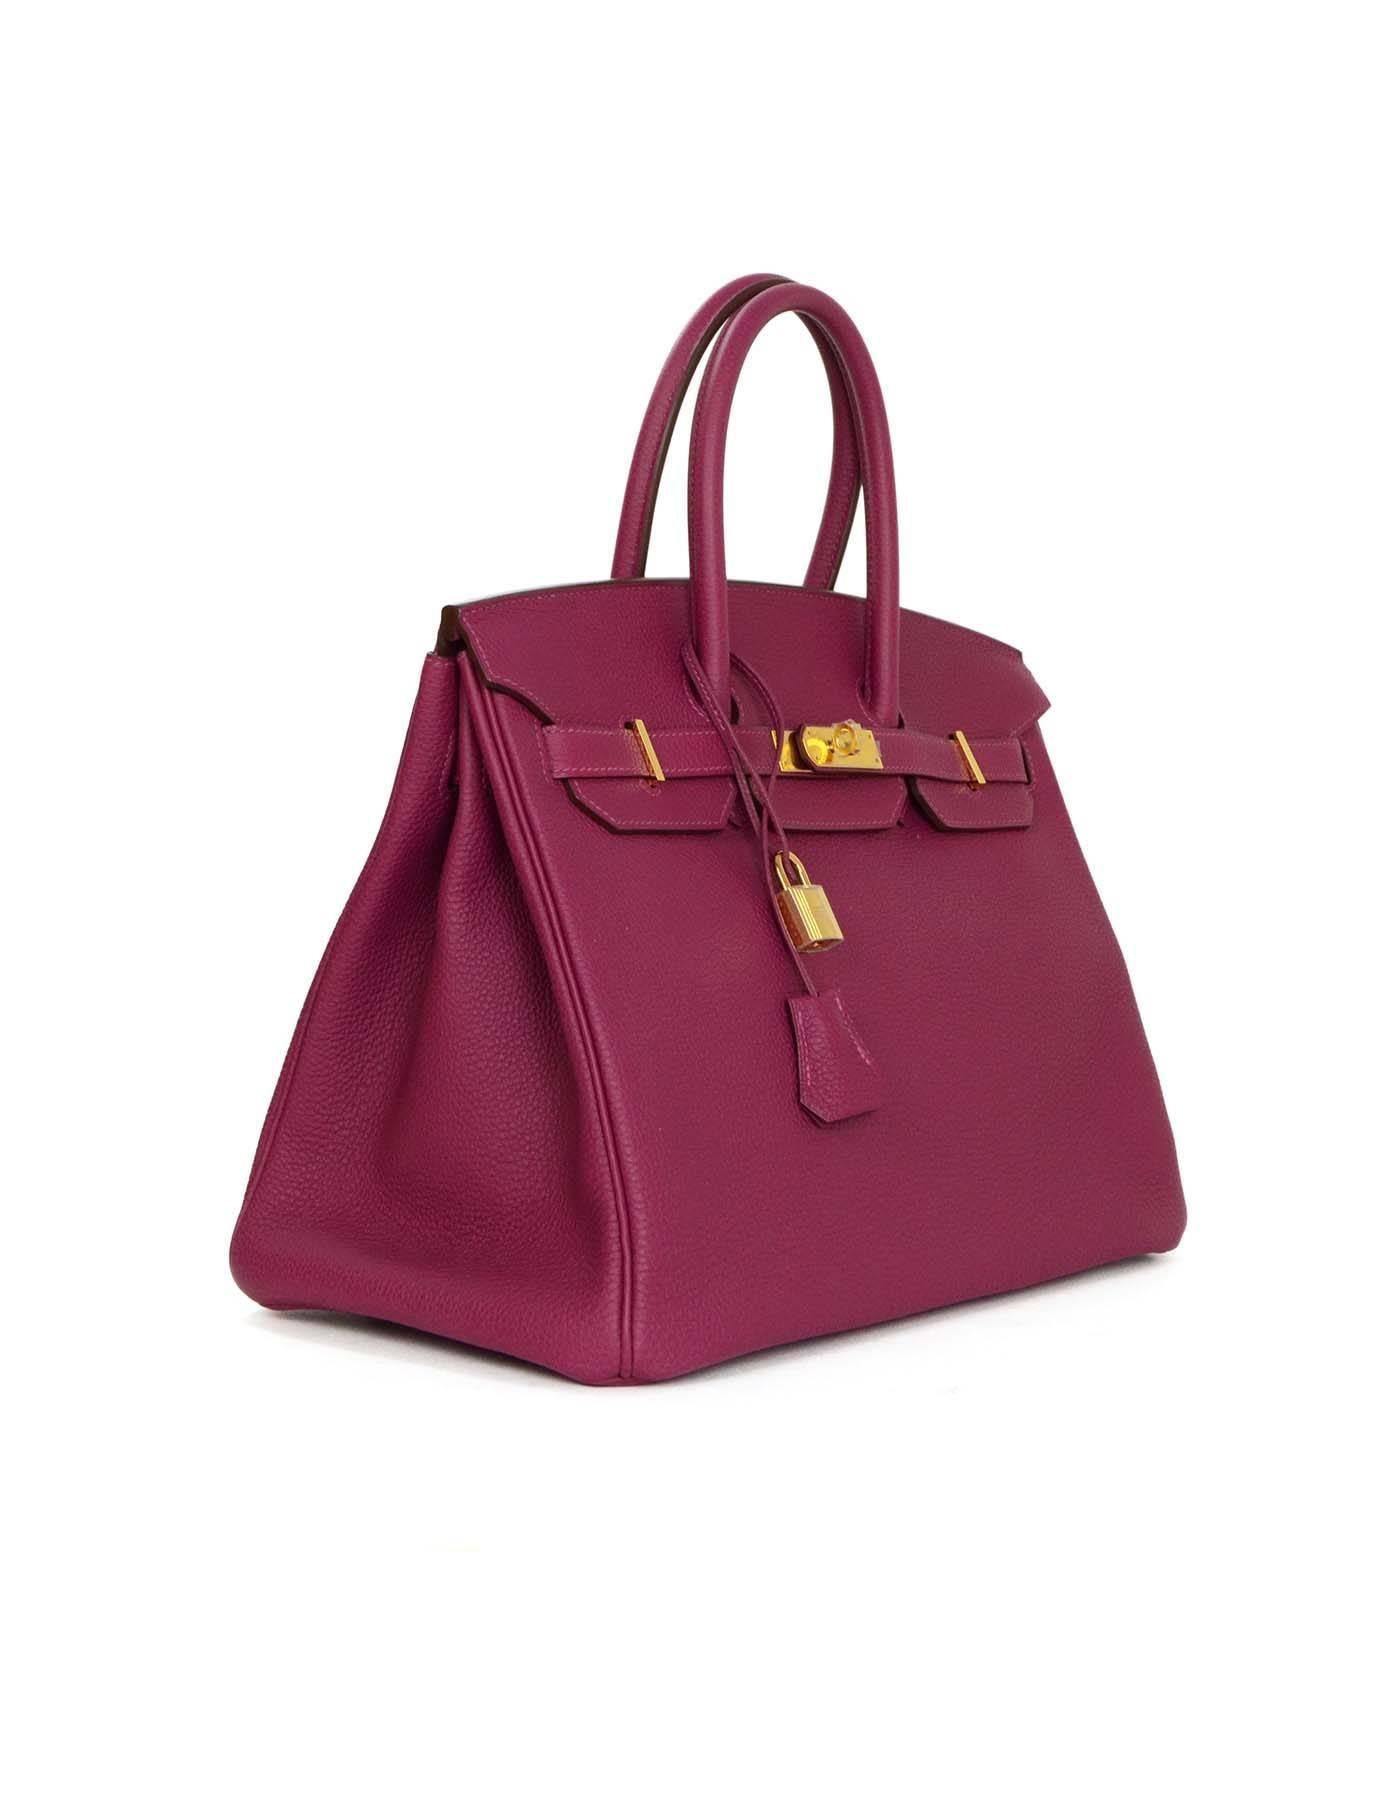 Hermes Violet Tosca Togo 35cm Birkin Bag 
Made In: France
Year of Production: 2013
Color: Violet Tosca
Hardware: Goldtone
Materials: Togo leather
Lining: Violet tosca chevre leather
Closure/Opening: Flap top with two leather arms that come